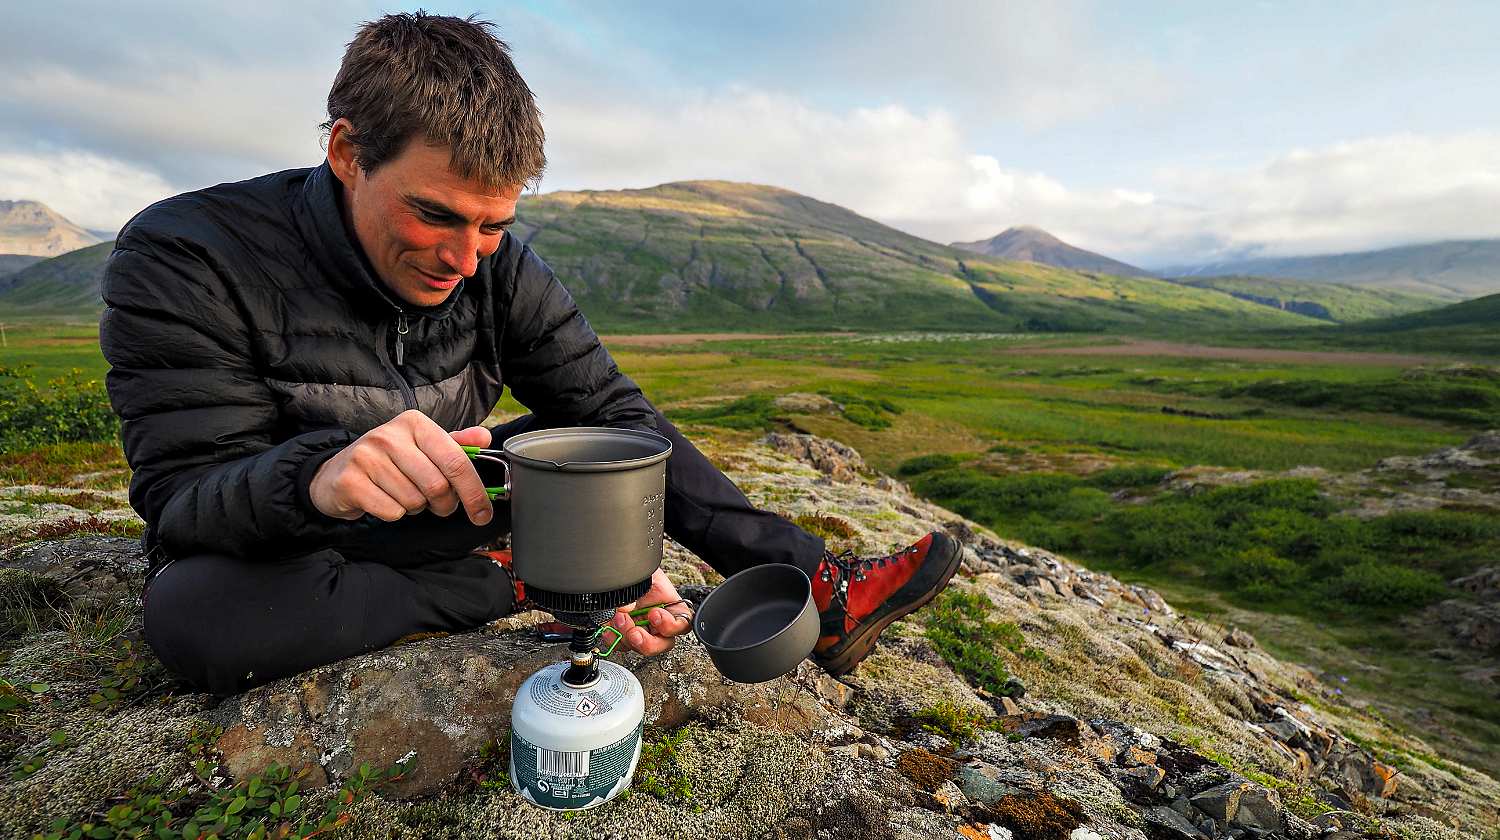 Feature | A man preparing to cook in the mountain | Improvised Survival Gear | DIY Projects For Preppers